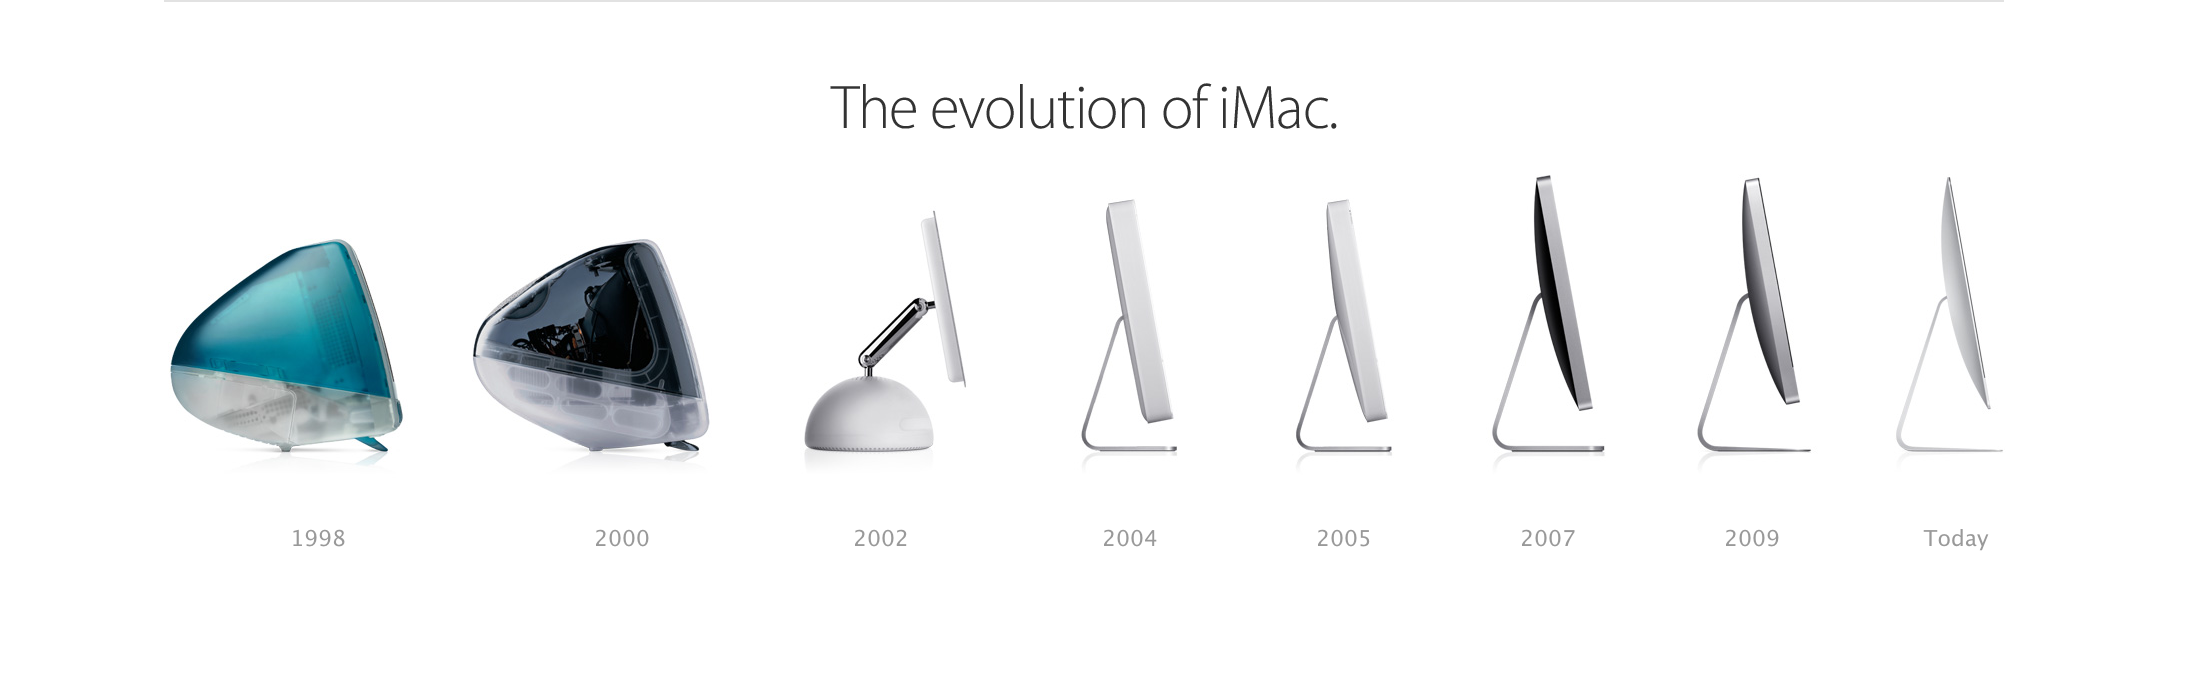 Design Iterations in the form factor for the iMac